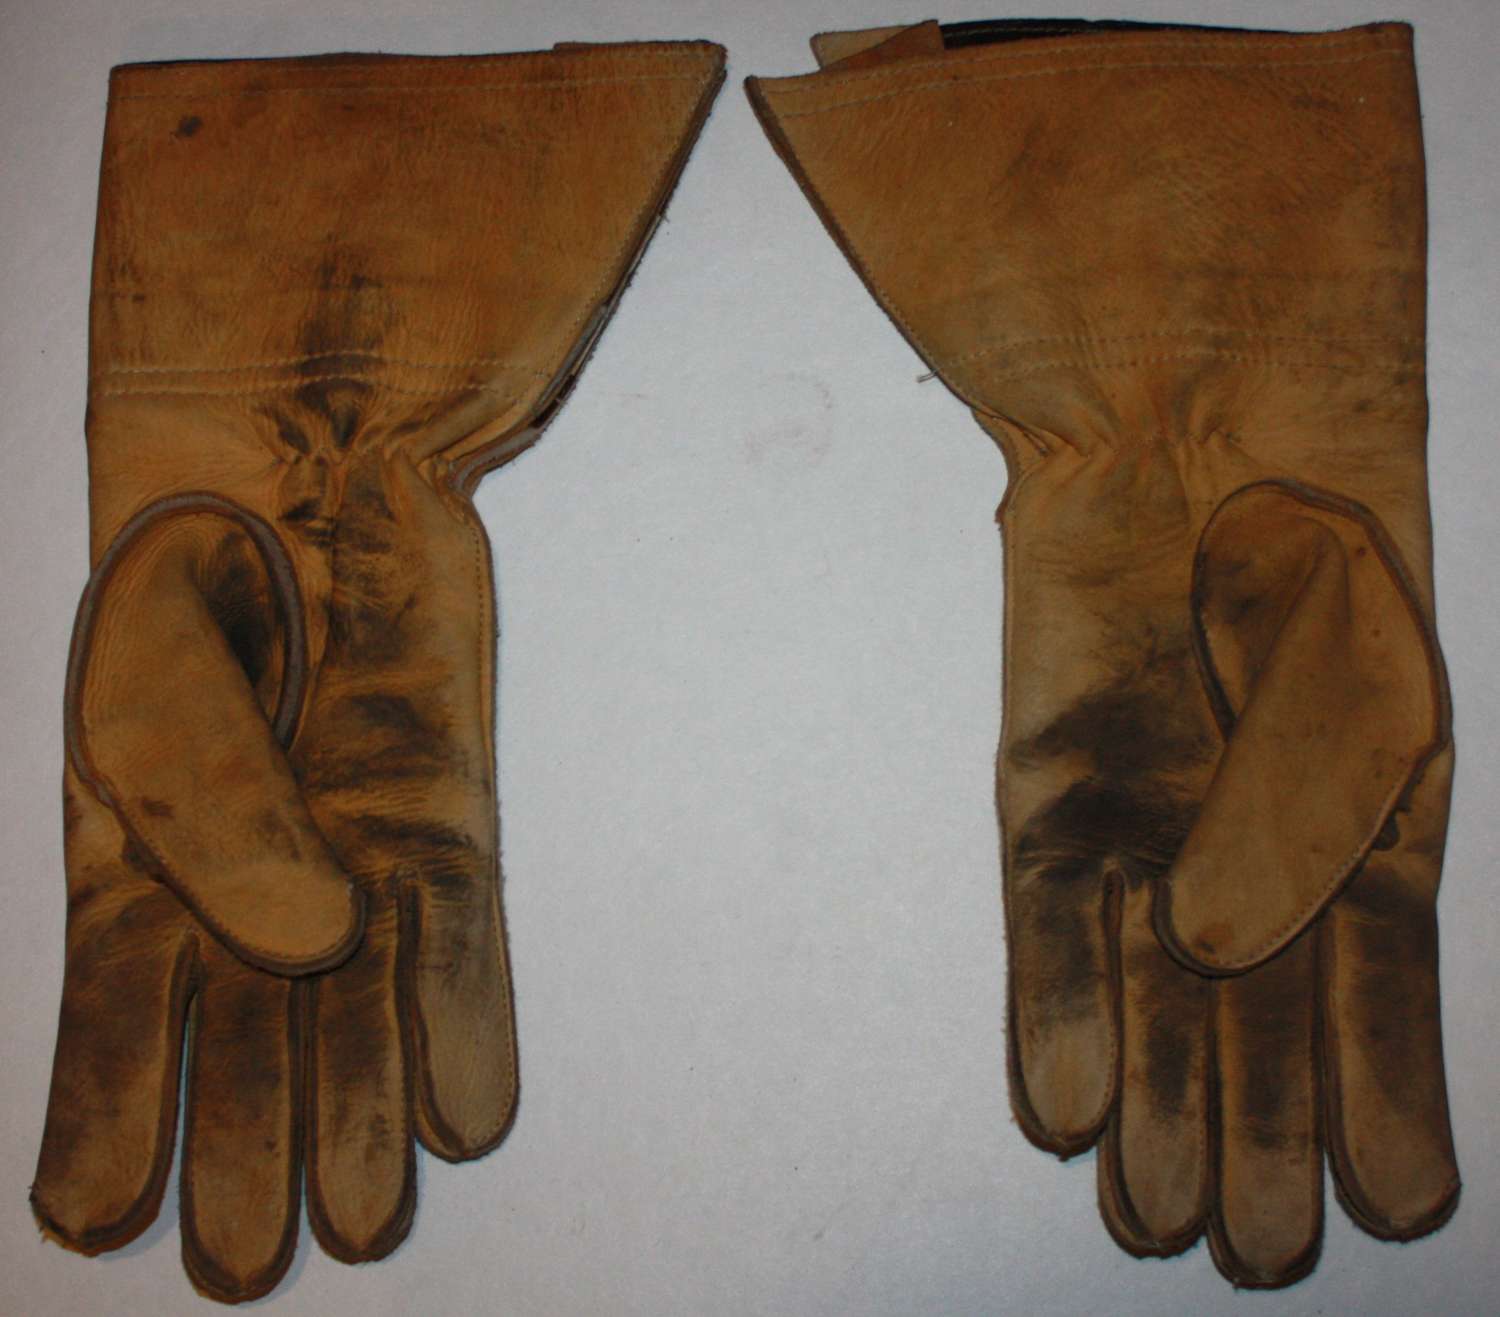 A GOOD USED PAIR OF POST WWII BRITISH ARMY ISSUE MC GAUNTLETS